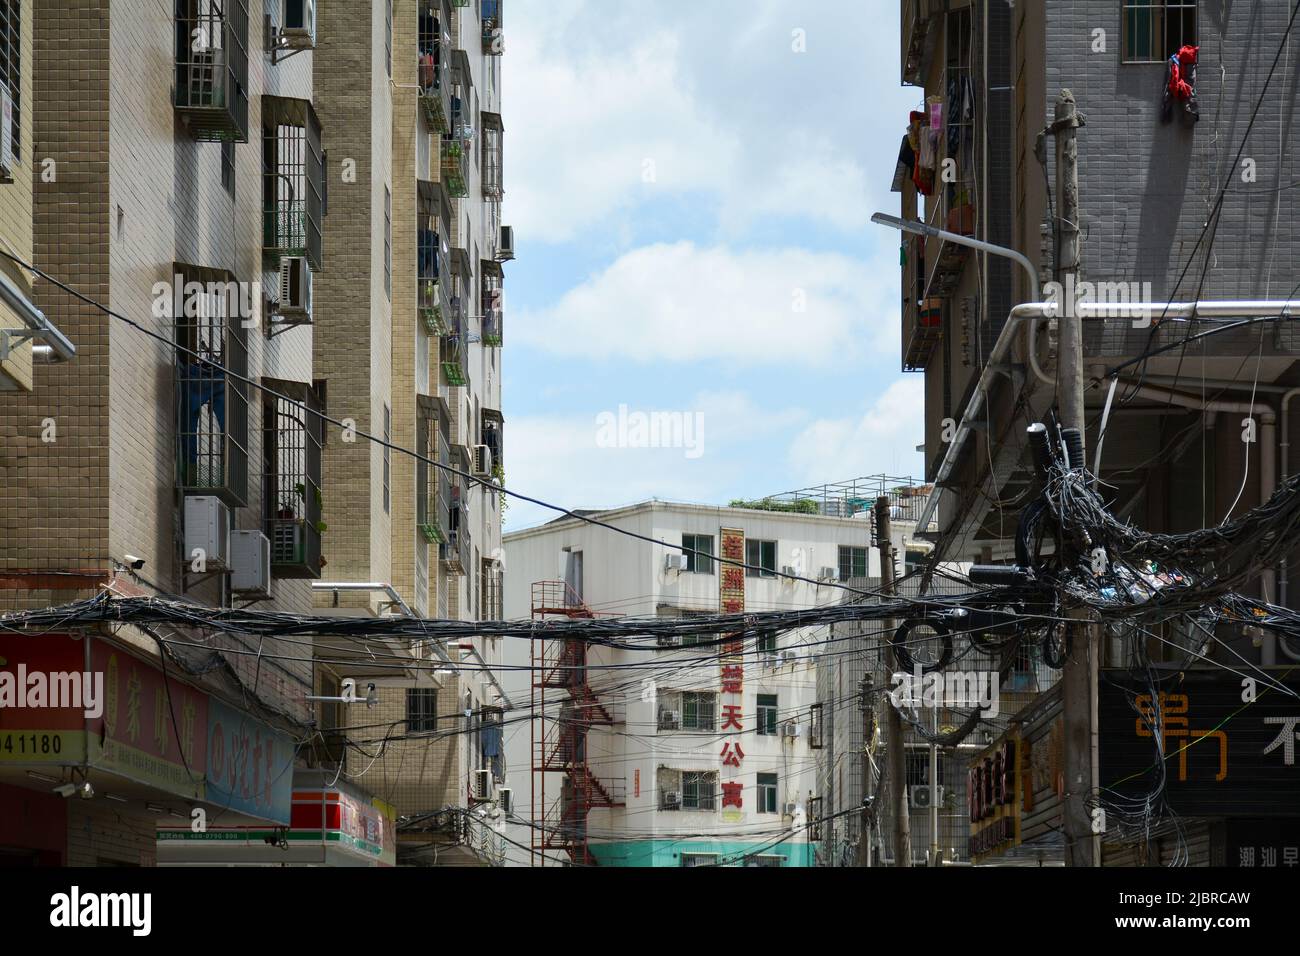 Crows nest of cables in a local community in the city of Shenzhen, China. A common sight as lines are just put up where they are needed. Stock Photo